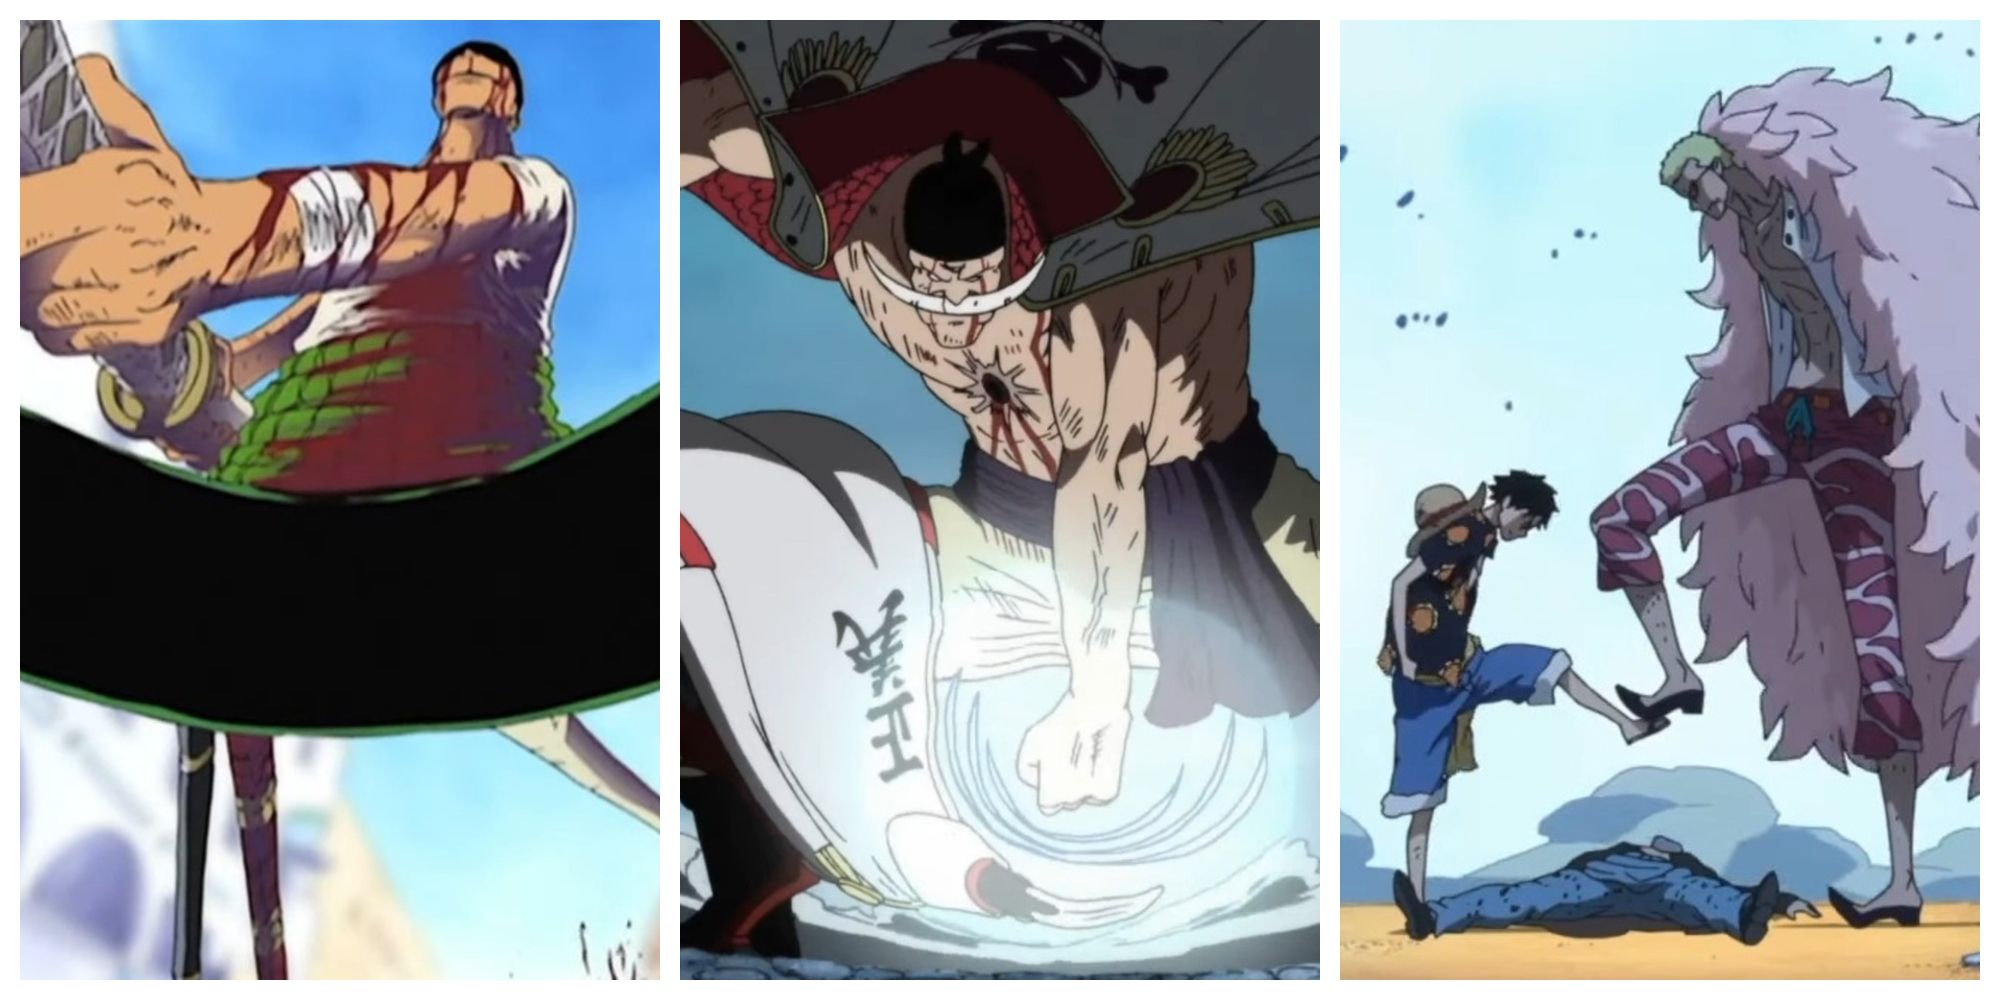 One Piece: 10 Best Fights From The Movies, Ranked